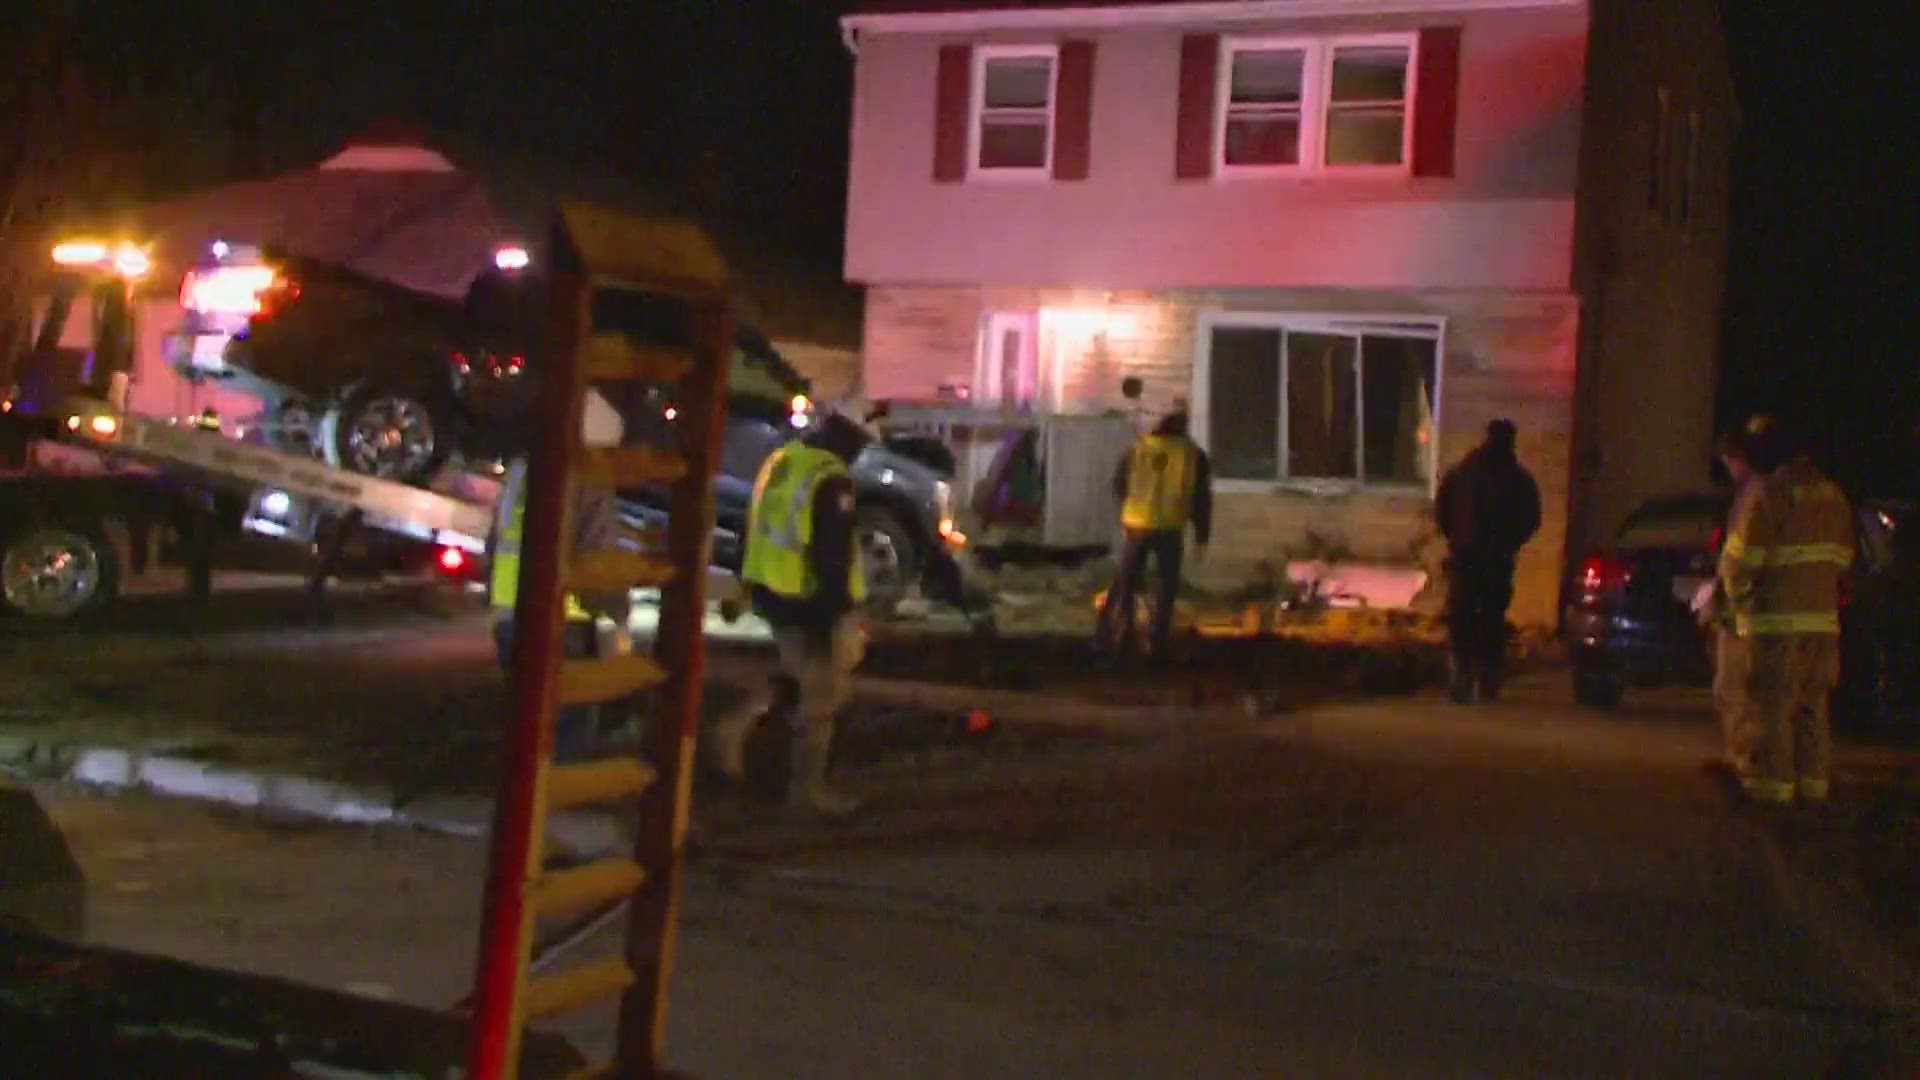 A truck has crashed into a home on Fairway Boulevard in Willowick.